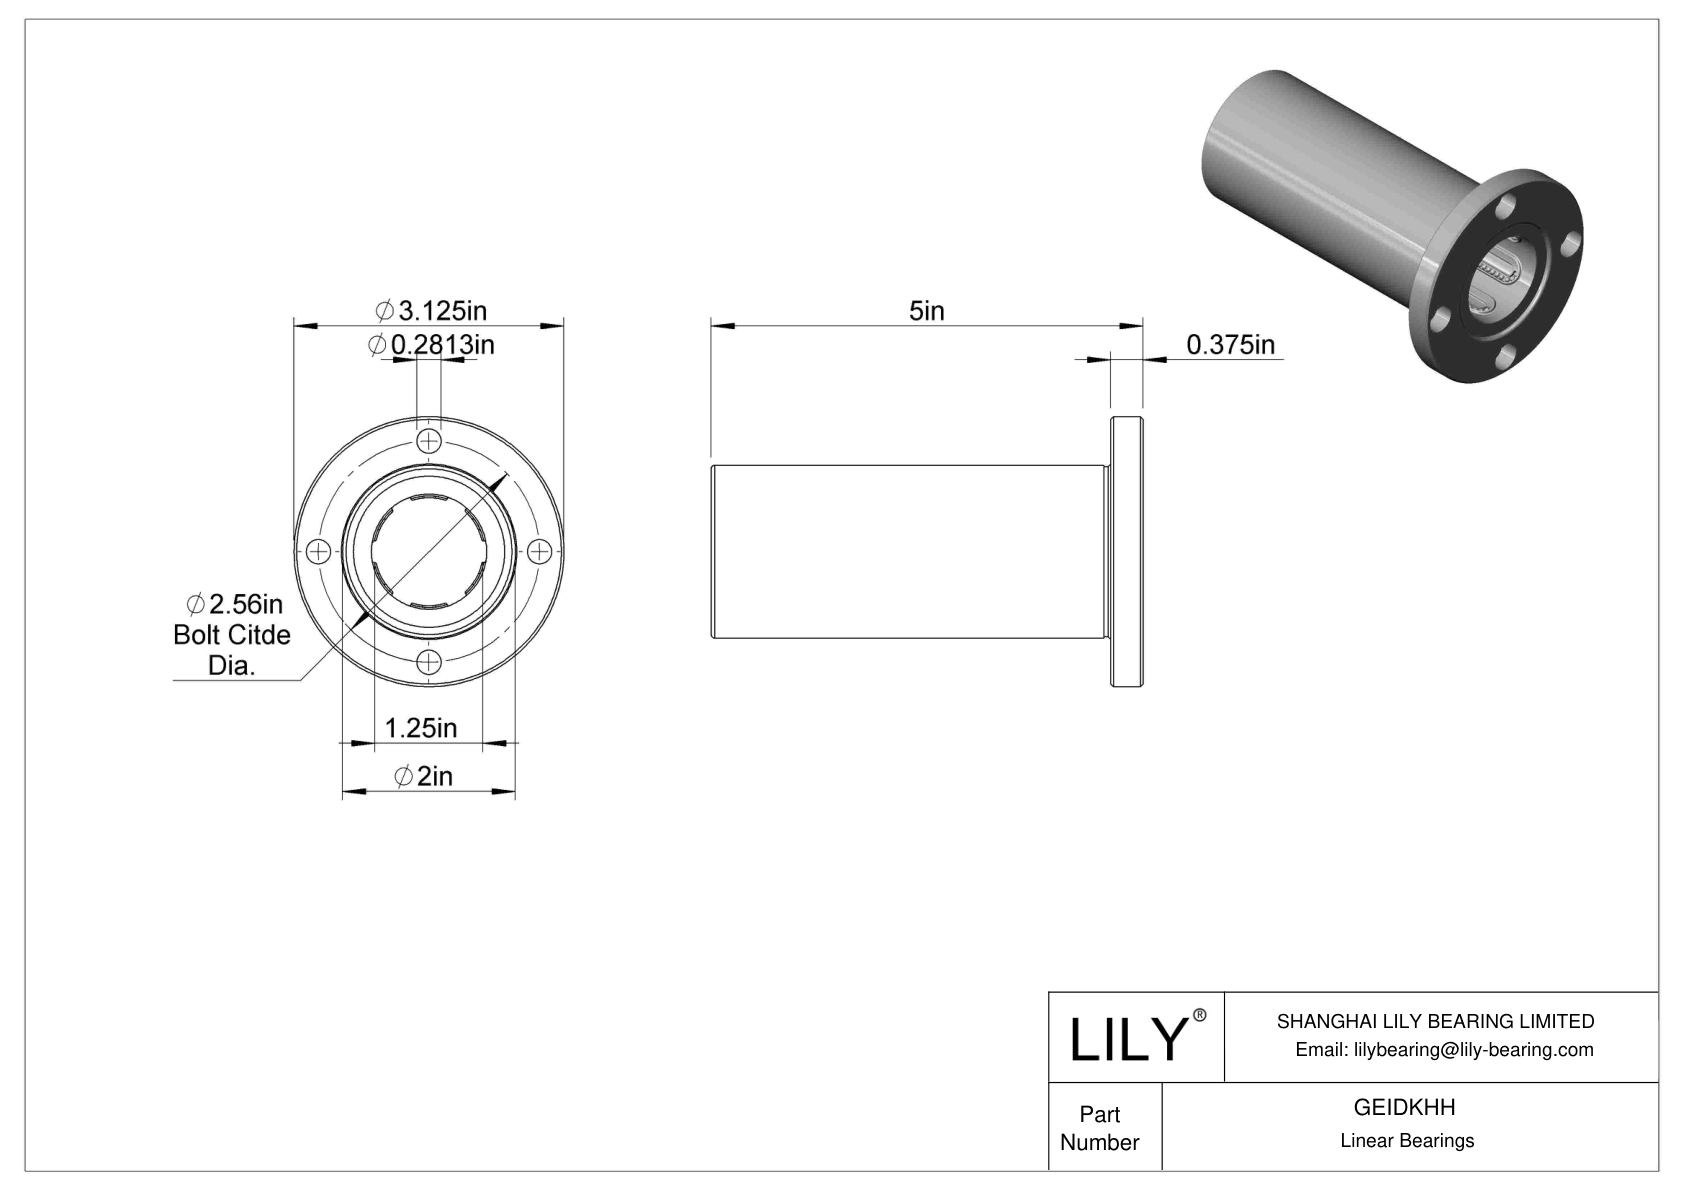 GEIDKHH Flange-Mounted Linear Ball Bearings cad drawing